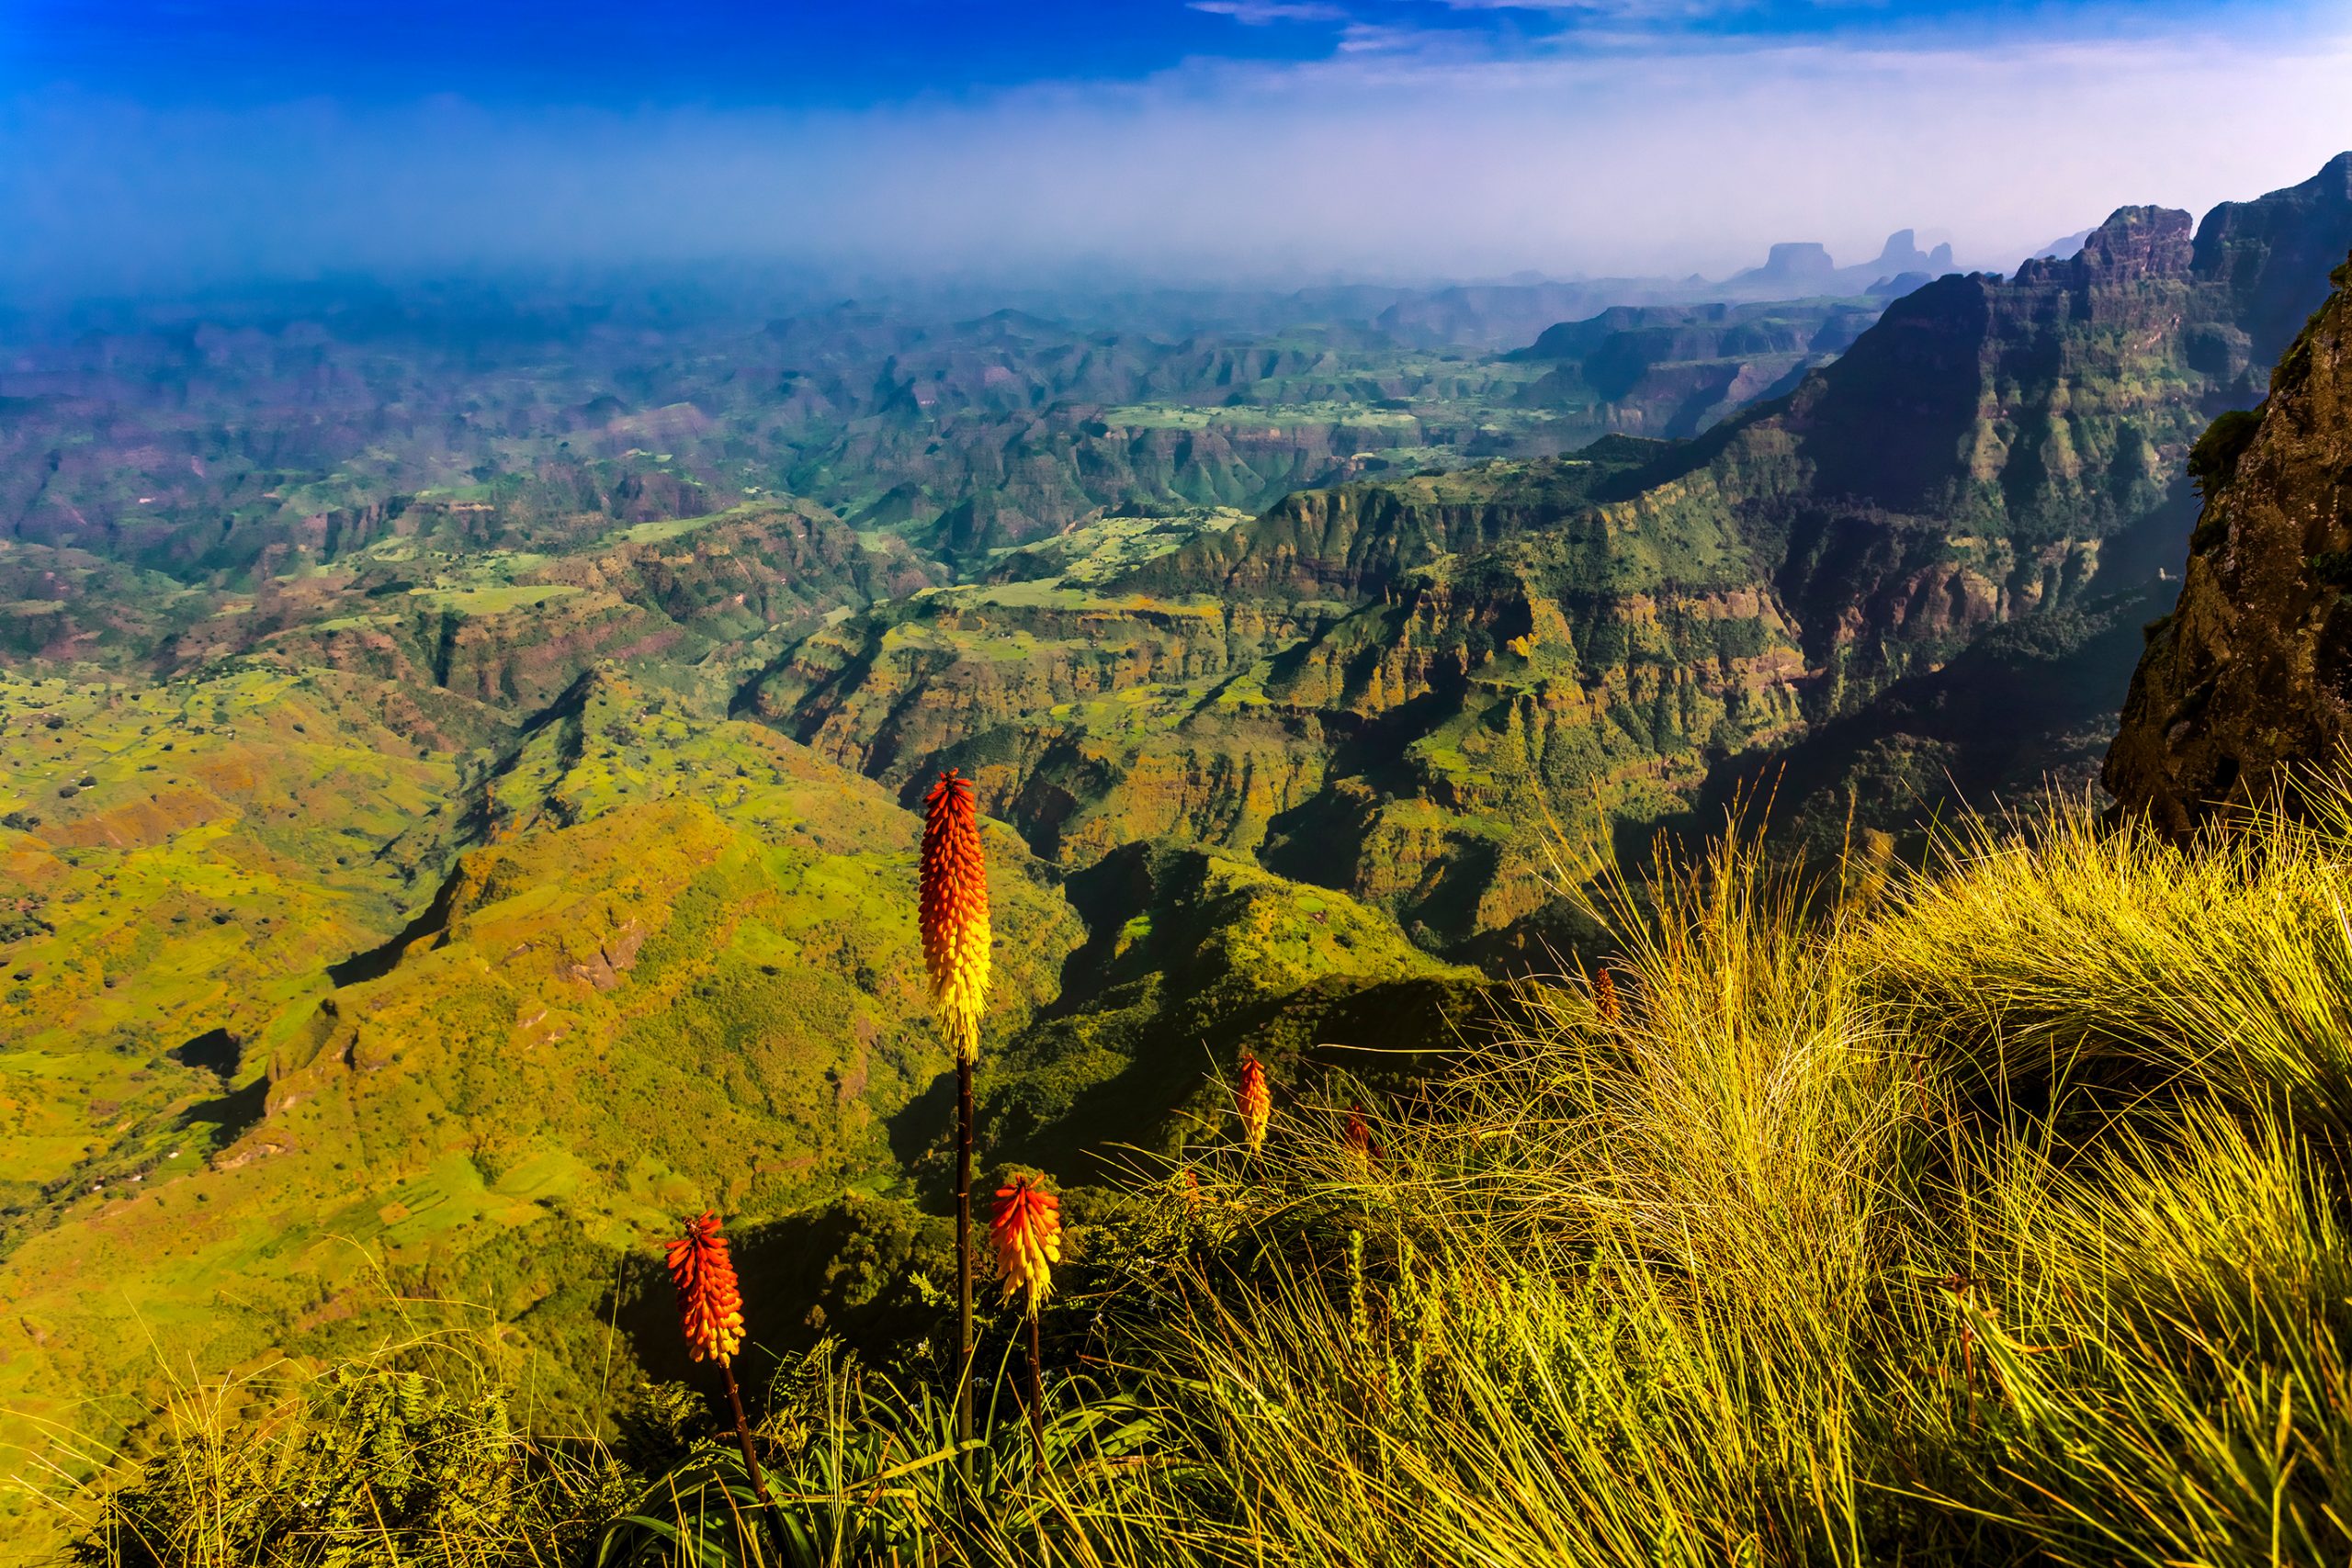 Ethiopia. Simien National Park. On the edge of cliff &#8211; there is Kniphofia in the foreground